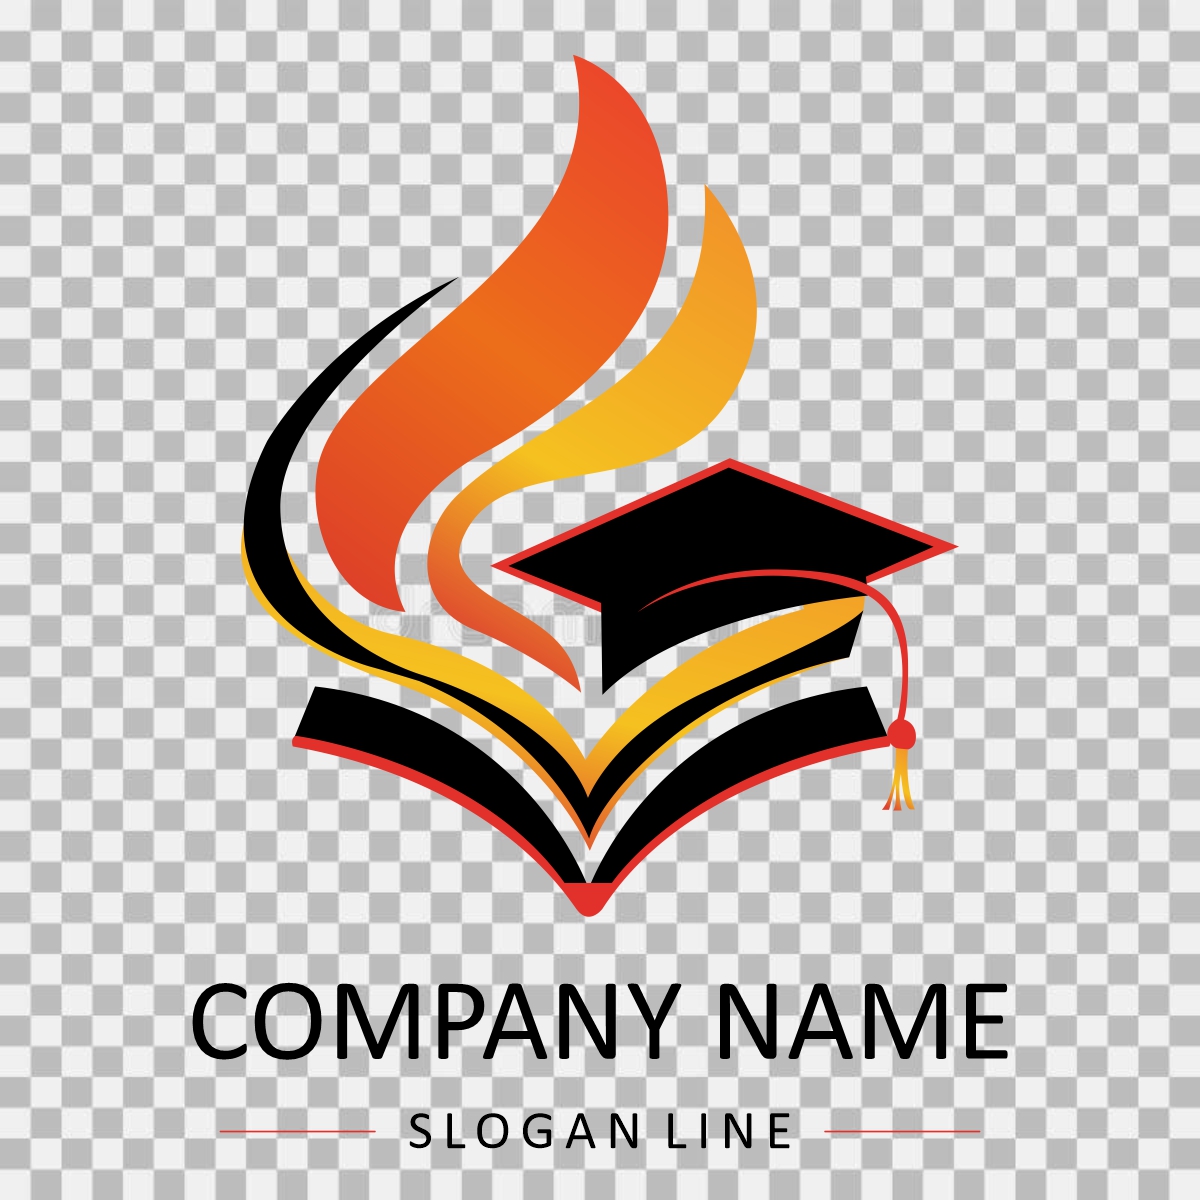 Company logo design download for free